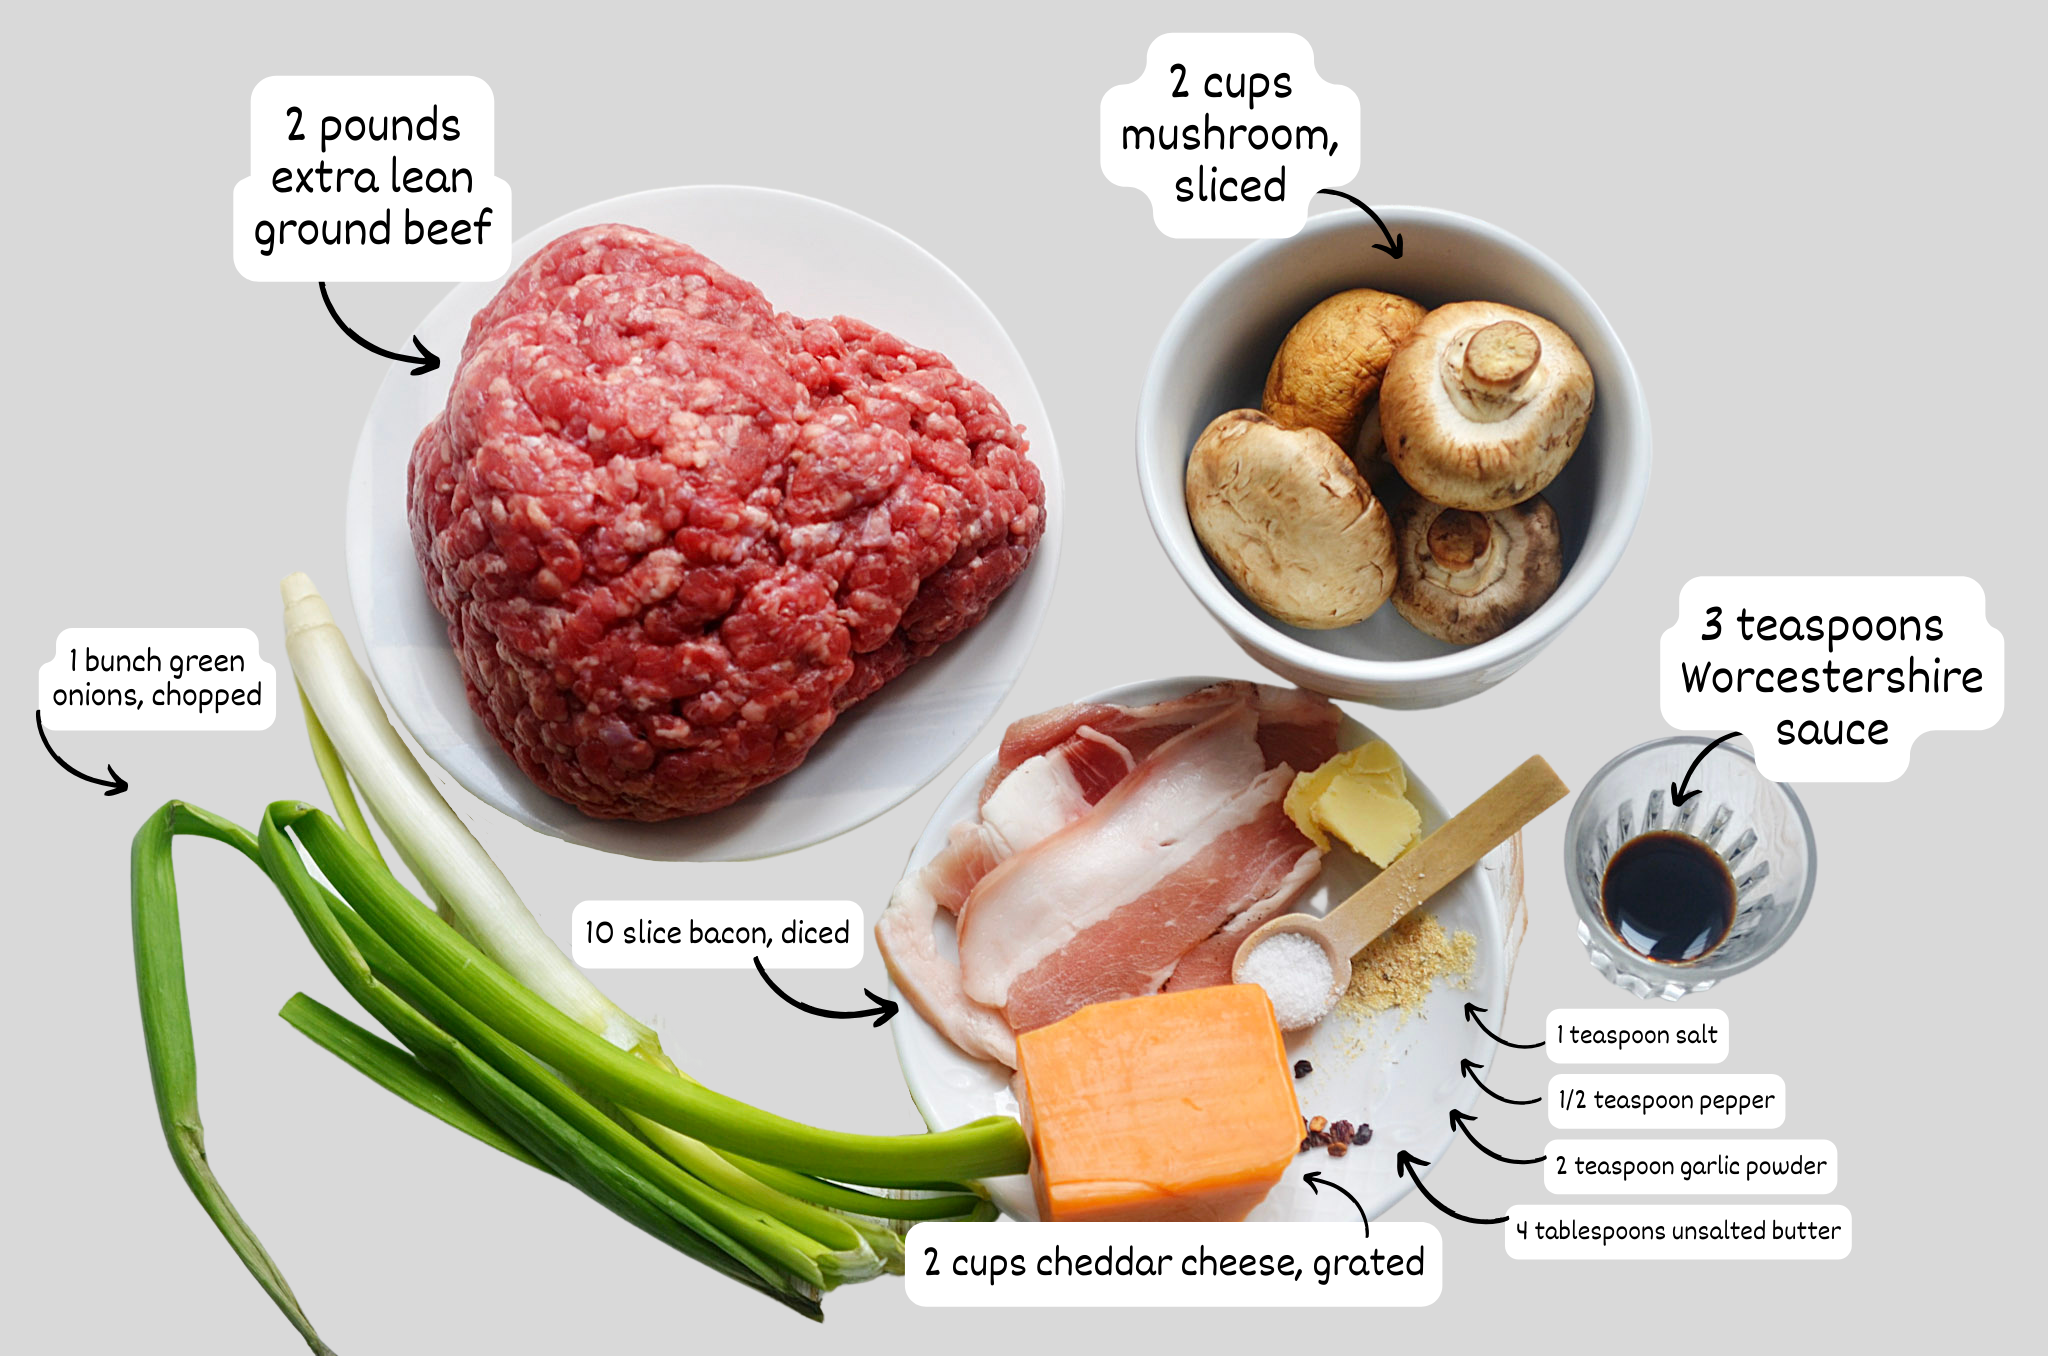 The ingredients for the Fully Loaded Burger Bowls are shown, there are labels with the name and measurements next to the items, with arrows pointing to them as well.